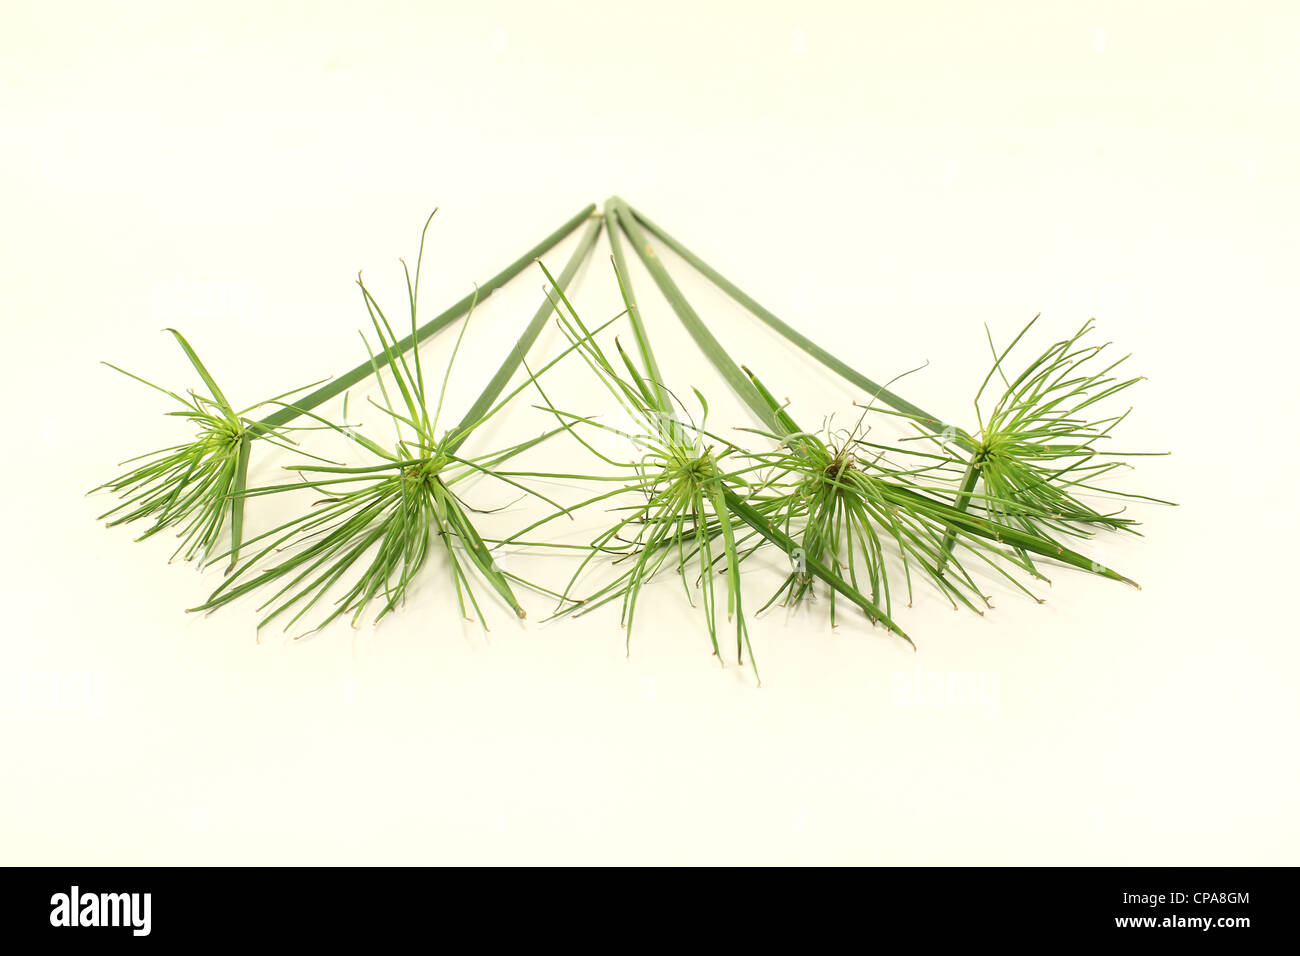 five fresh green papyrus stems on a light background Stock Photo